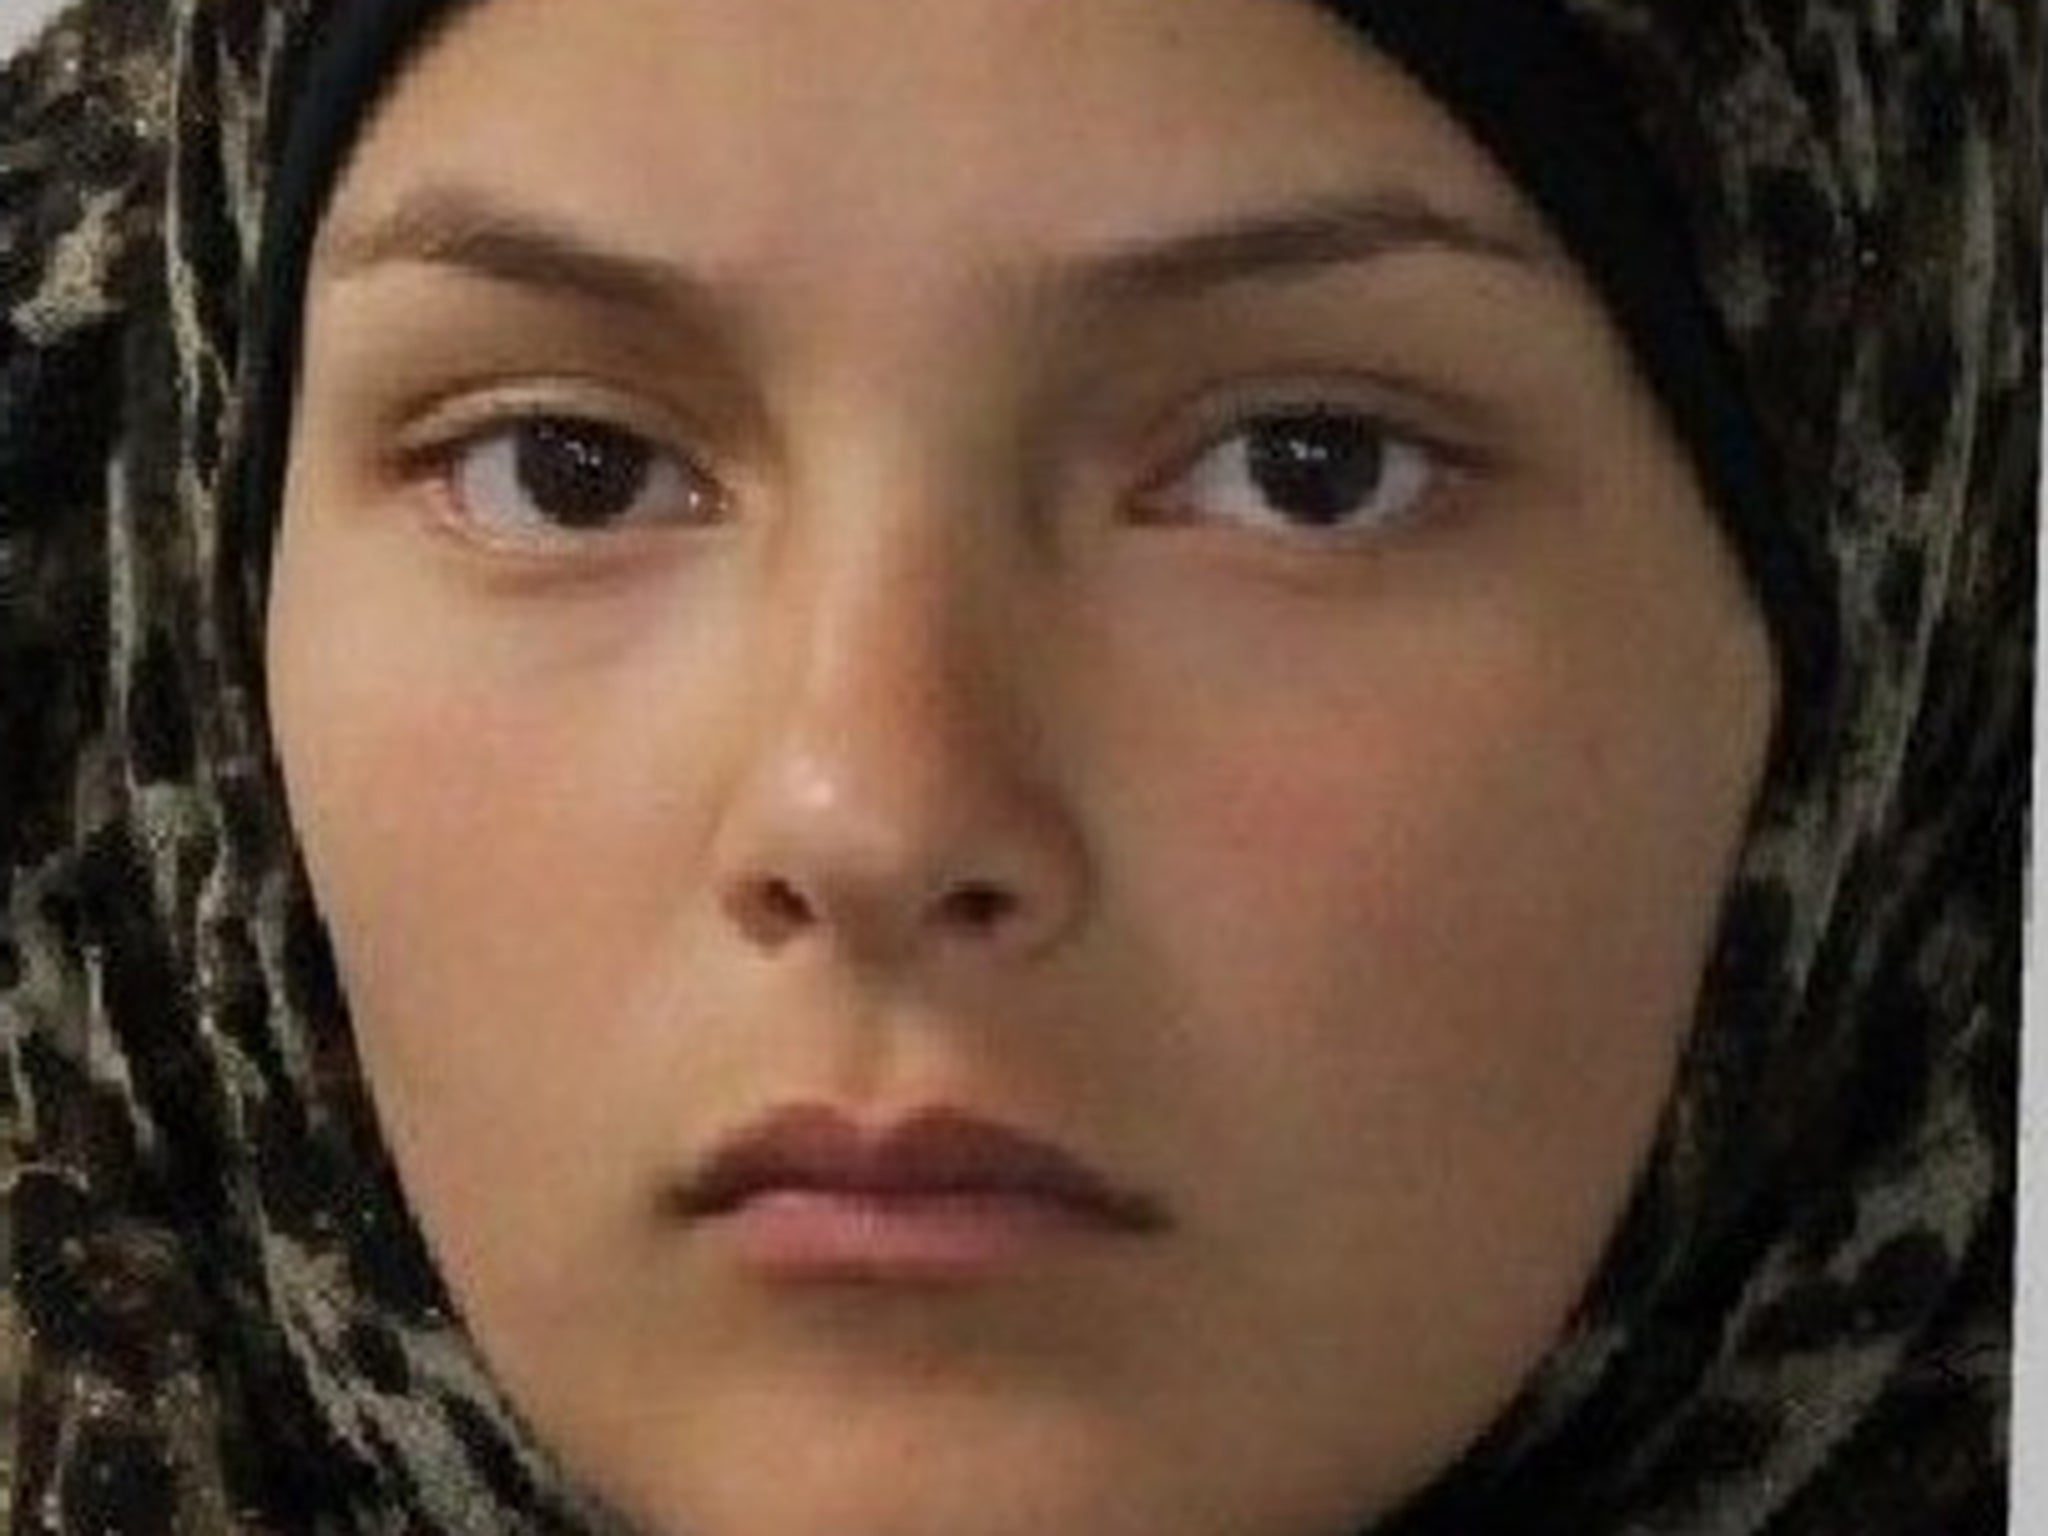 Fatema Alkasem, 14, was 9 months pregnant when she disappeared from the Netherlands main asylum centre